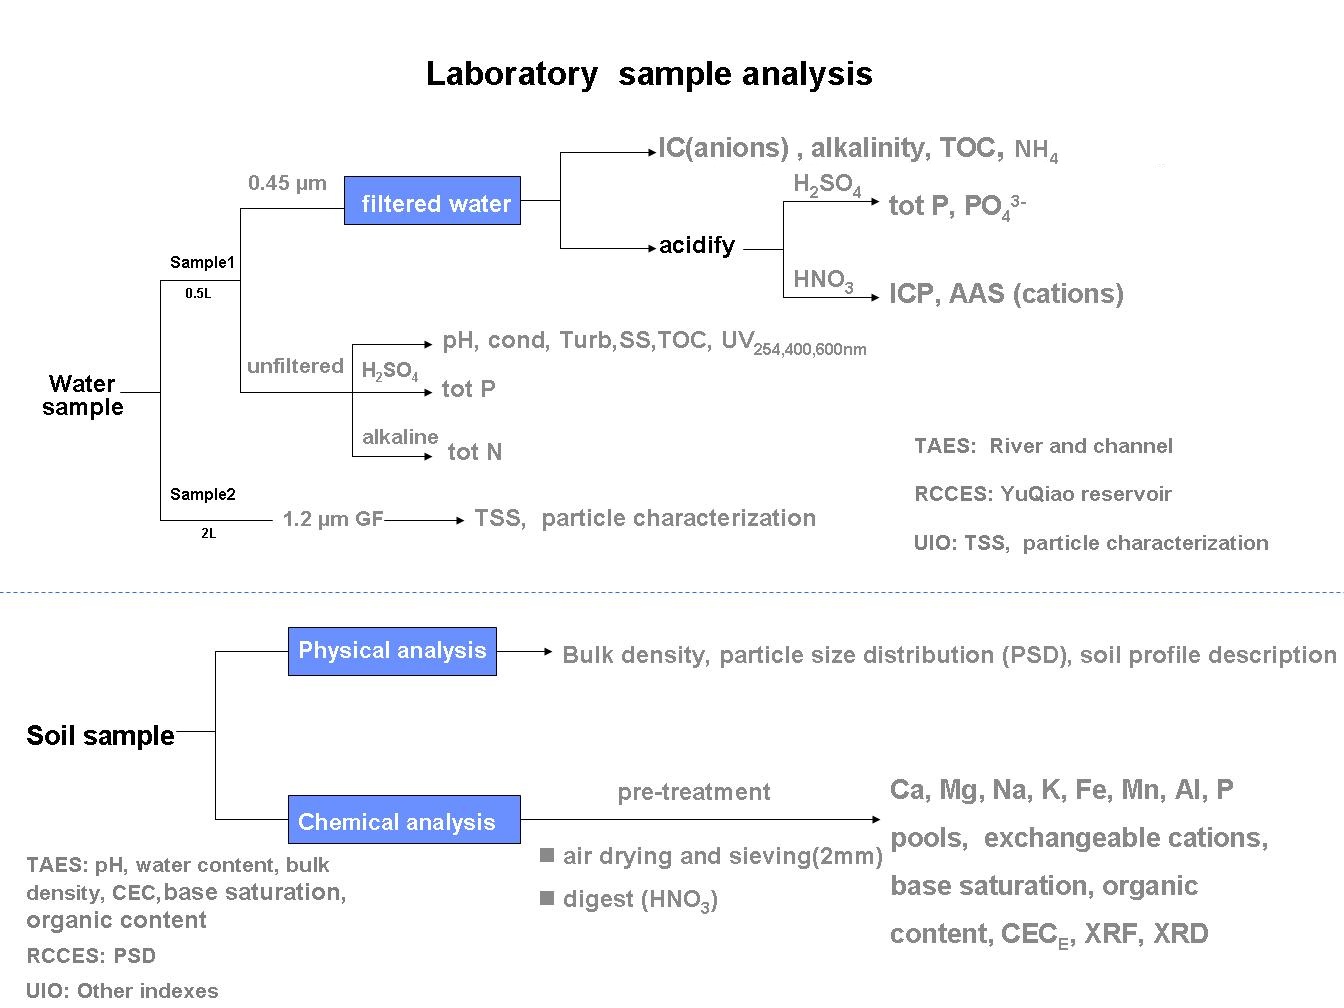 Flow diagram illustrating thechemical analysis that are conducted on soil and water samples. 